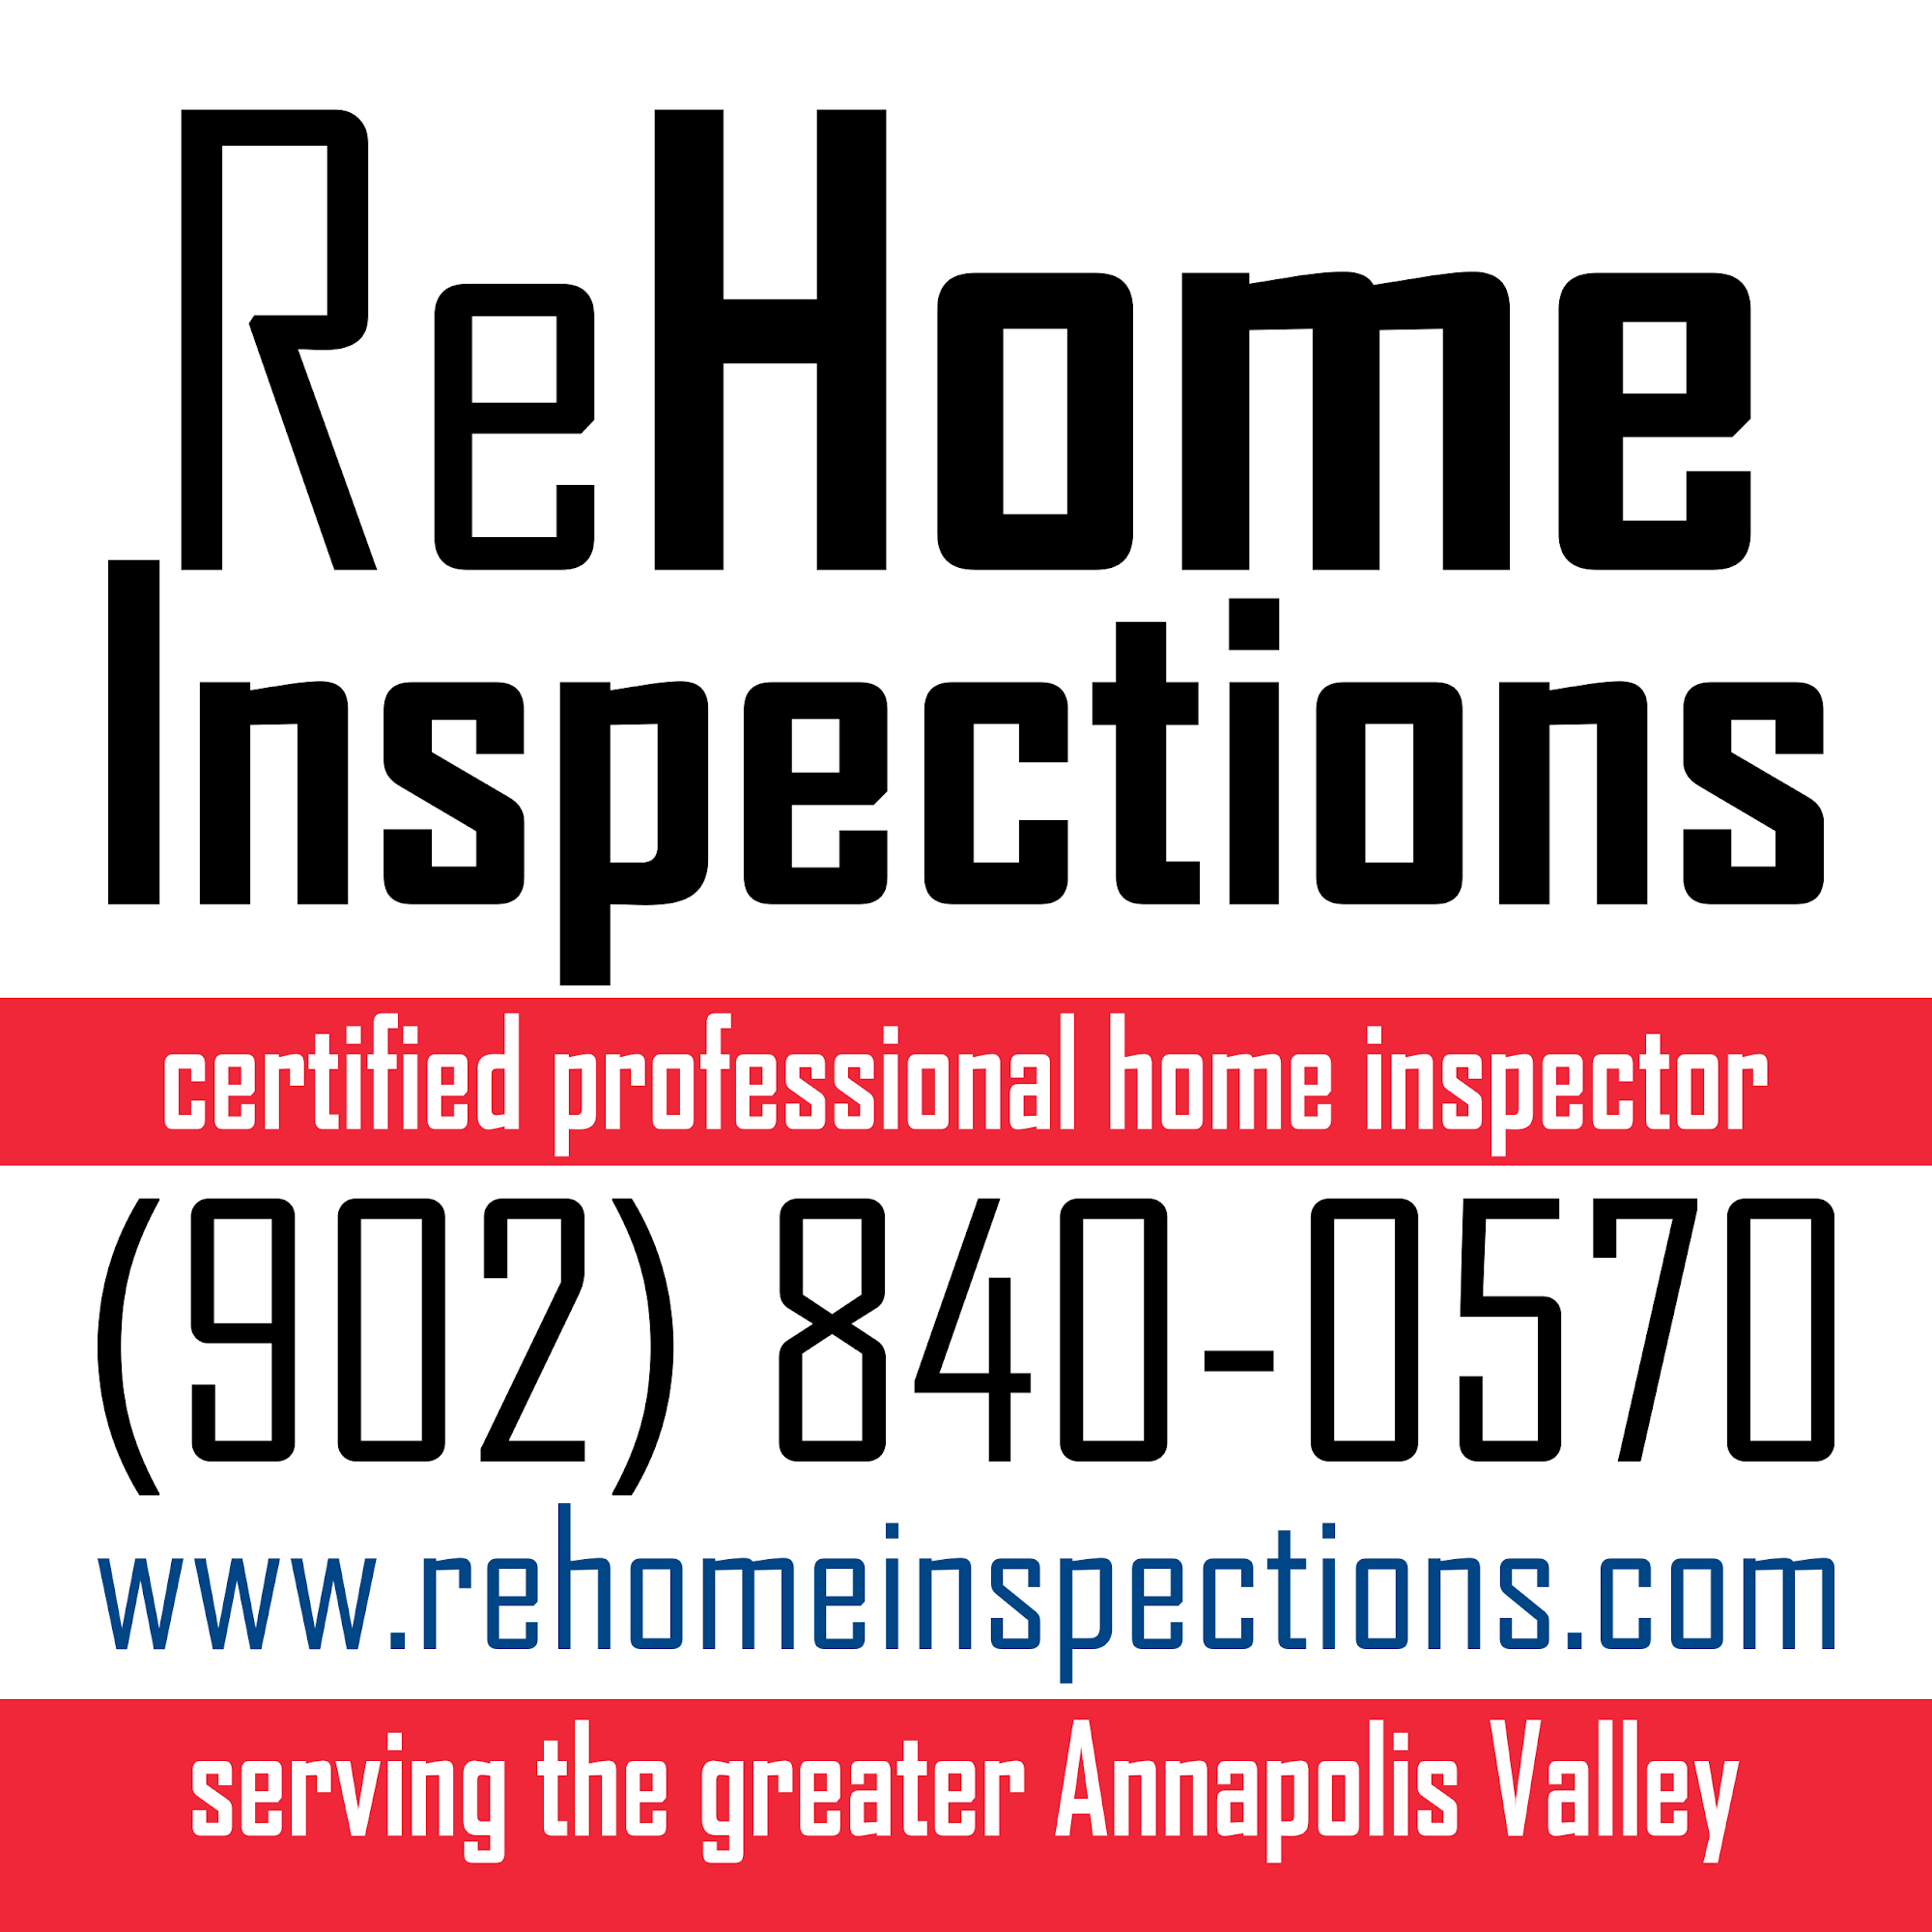 ReHome Inspections - Certified Home Inspector - Annapolis Valley, NS 5440 Granville Rd, Annapolis Royal Nova Scotia B0S 1A0